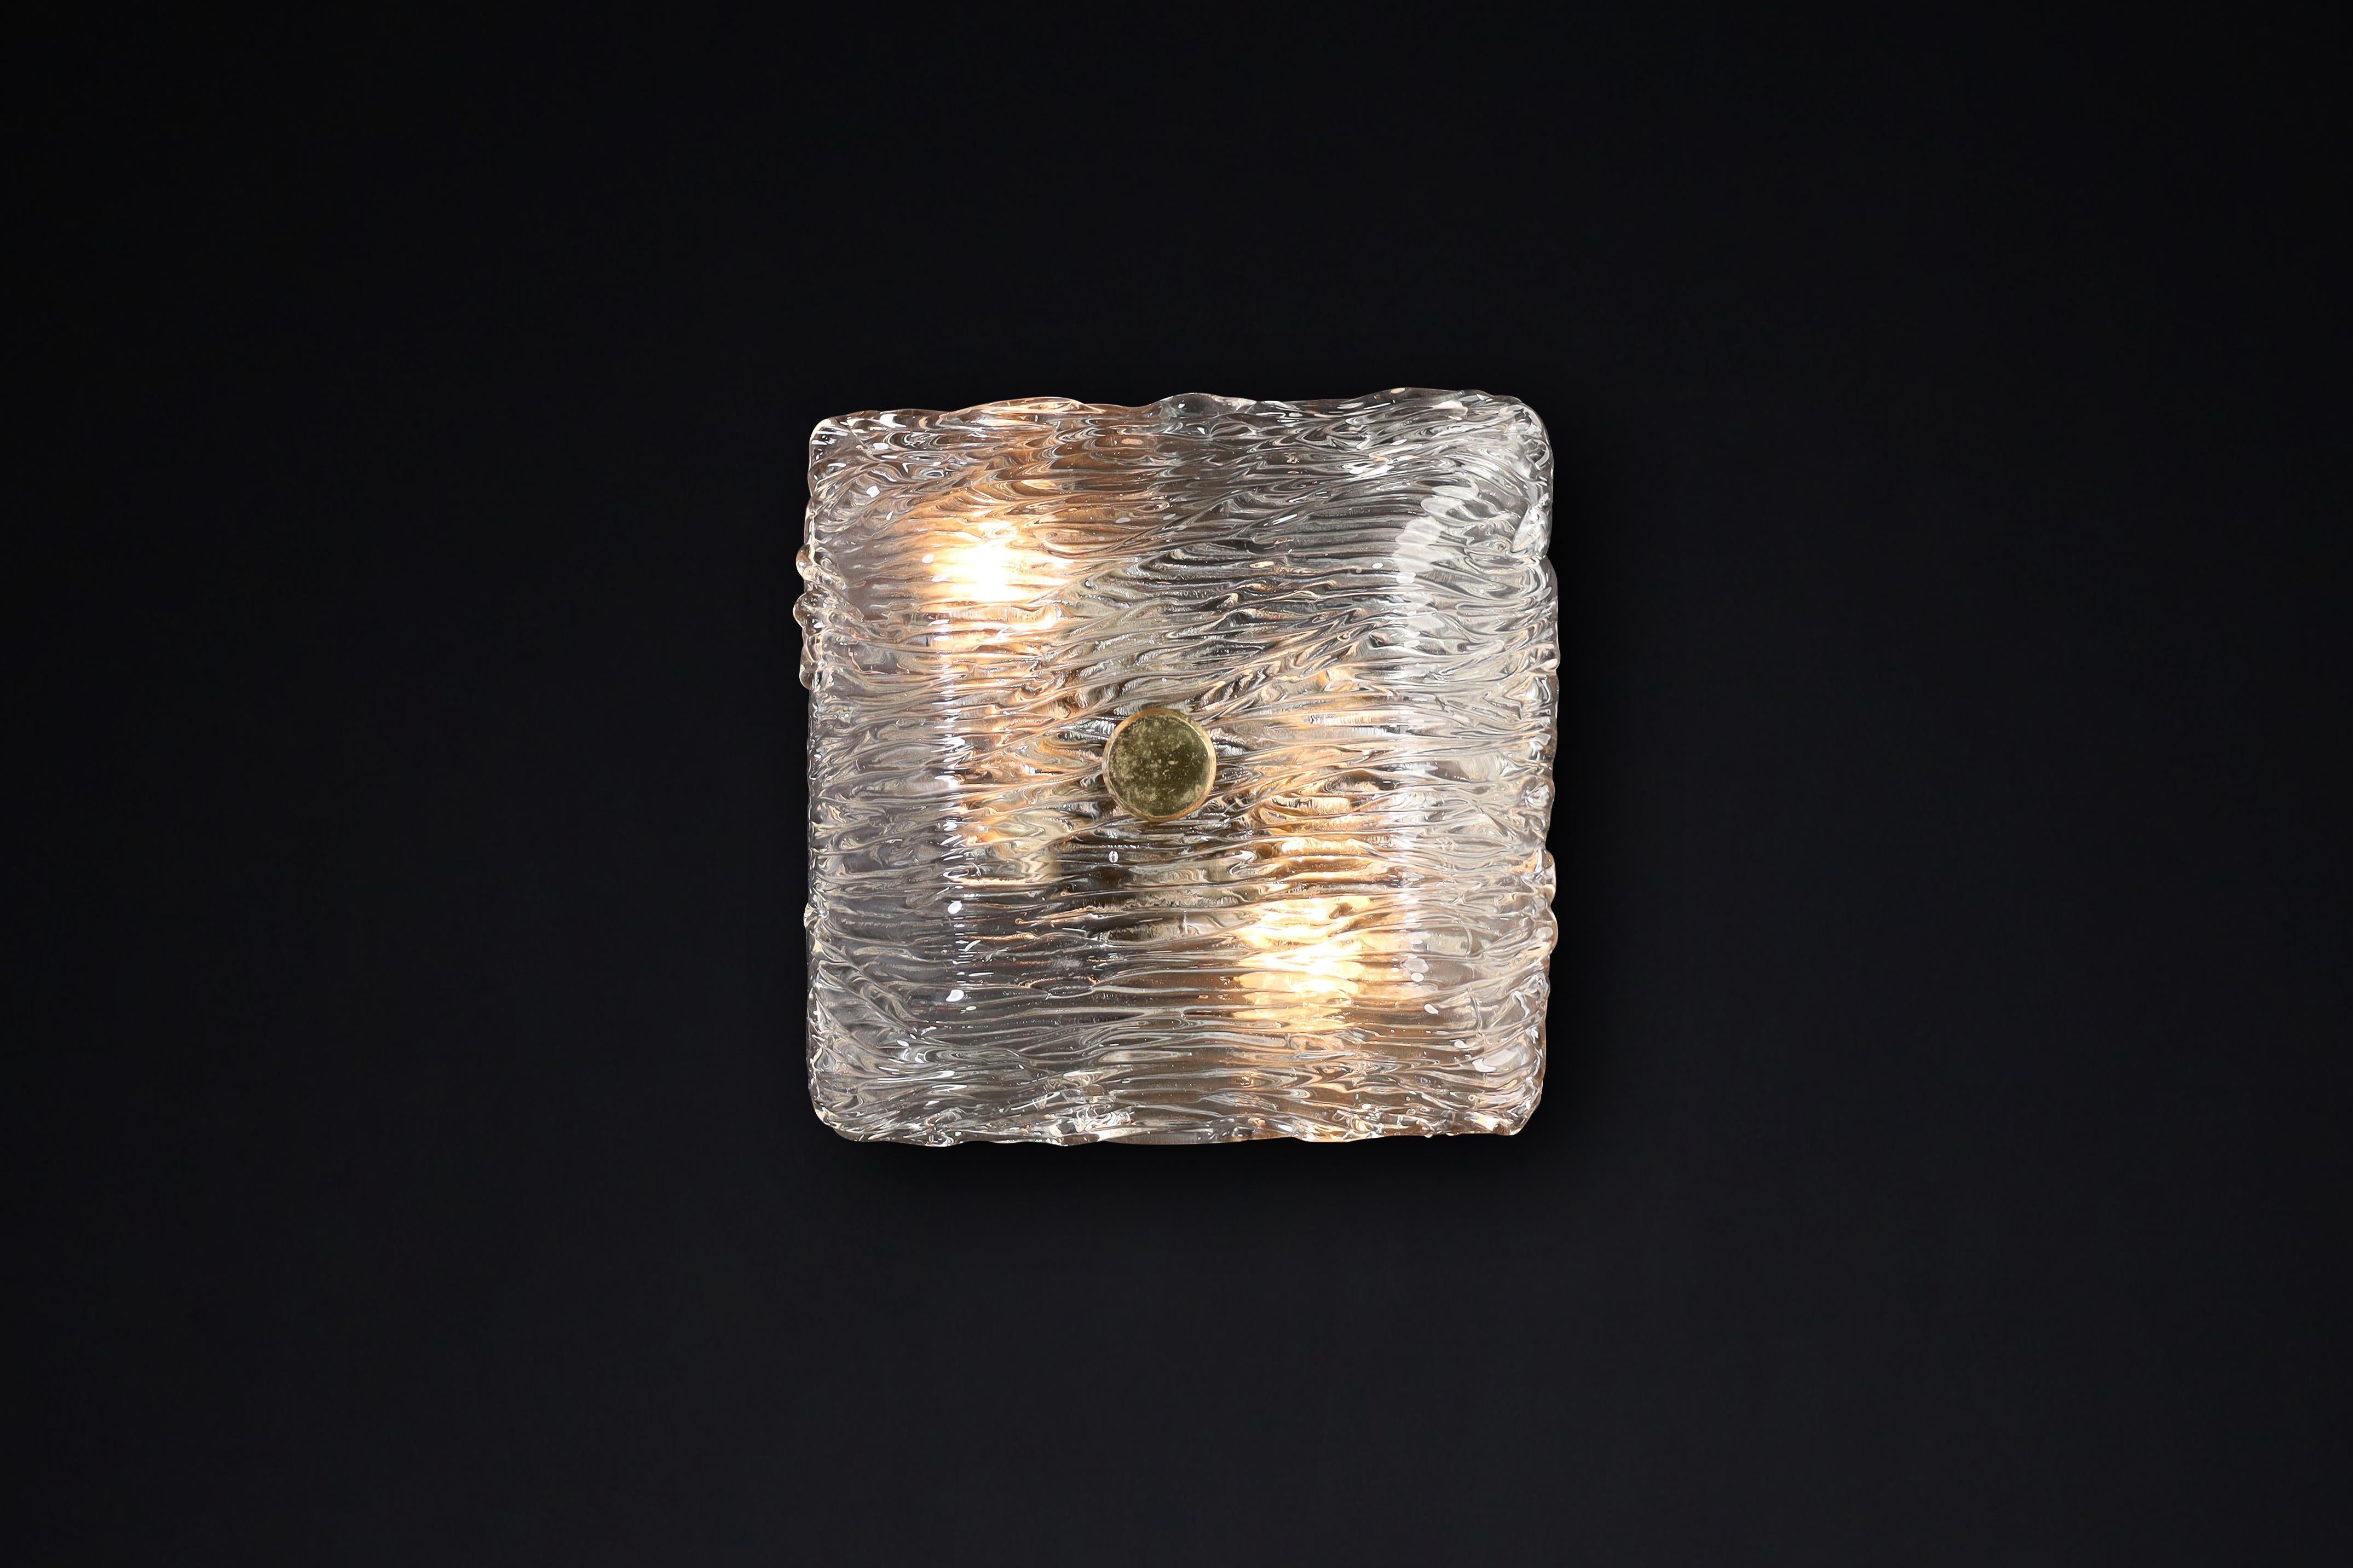 Square Venini Murano Flush Mount / Wall light from the Bambù series, made in Italy in the 1950s. 

Midcentury Square Venini Murano Flush Mount / Wall light from the Bambù series, made in Italy during the 1950s. The light fixture is made of